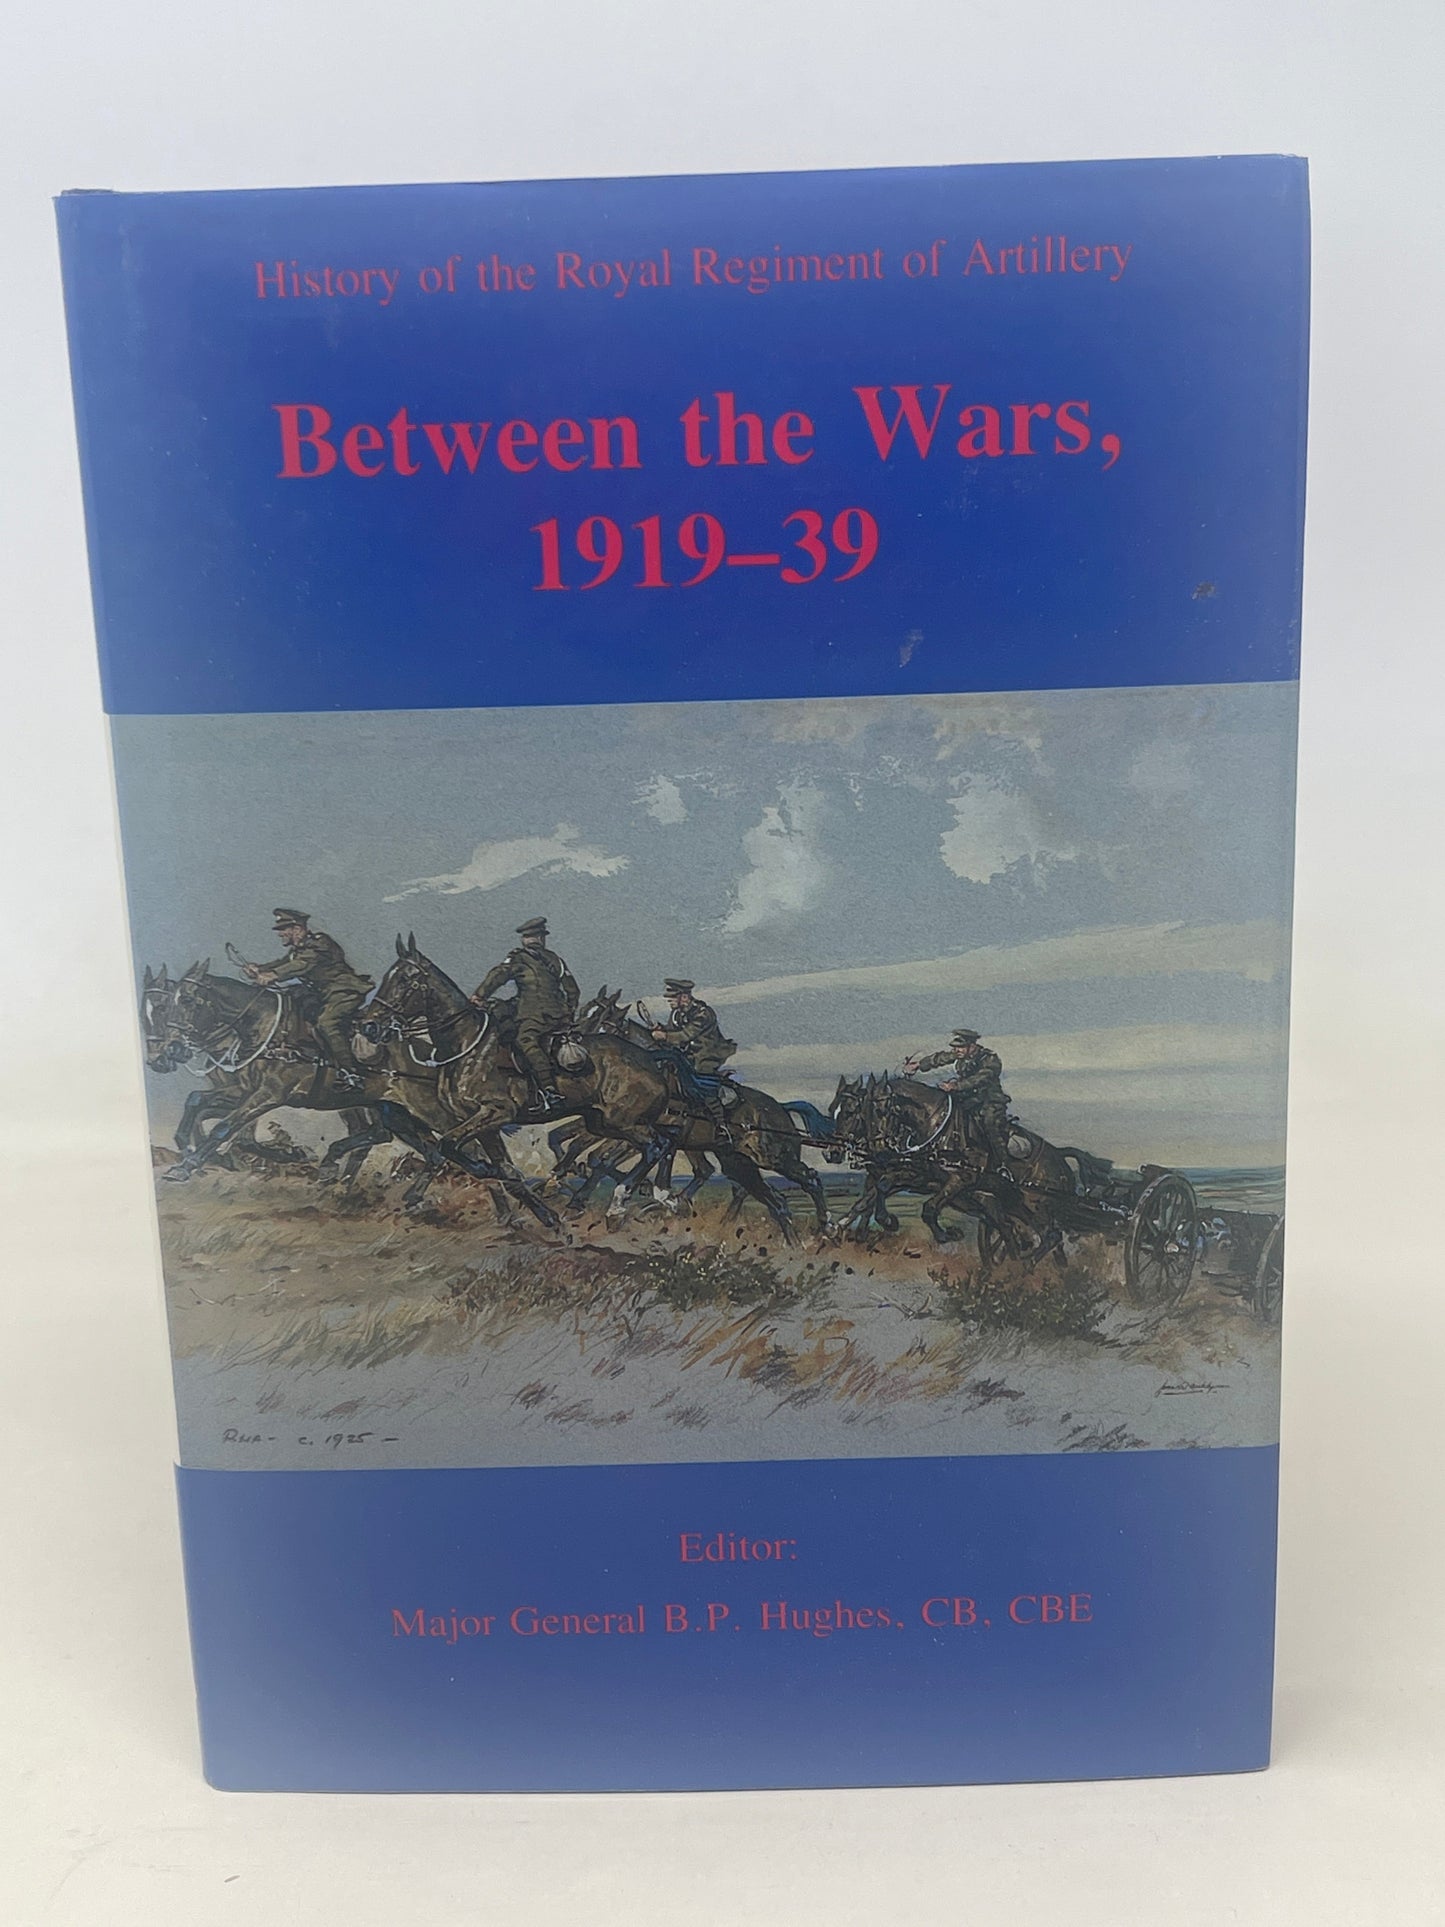 Between The Wars 1919-39 by General Sir Martin Farndale KCB.